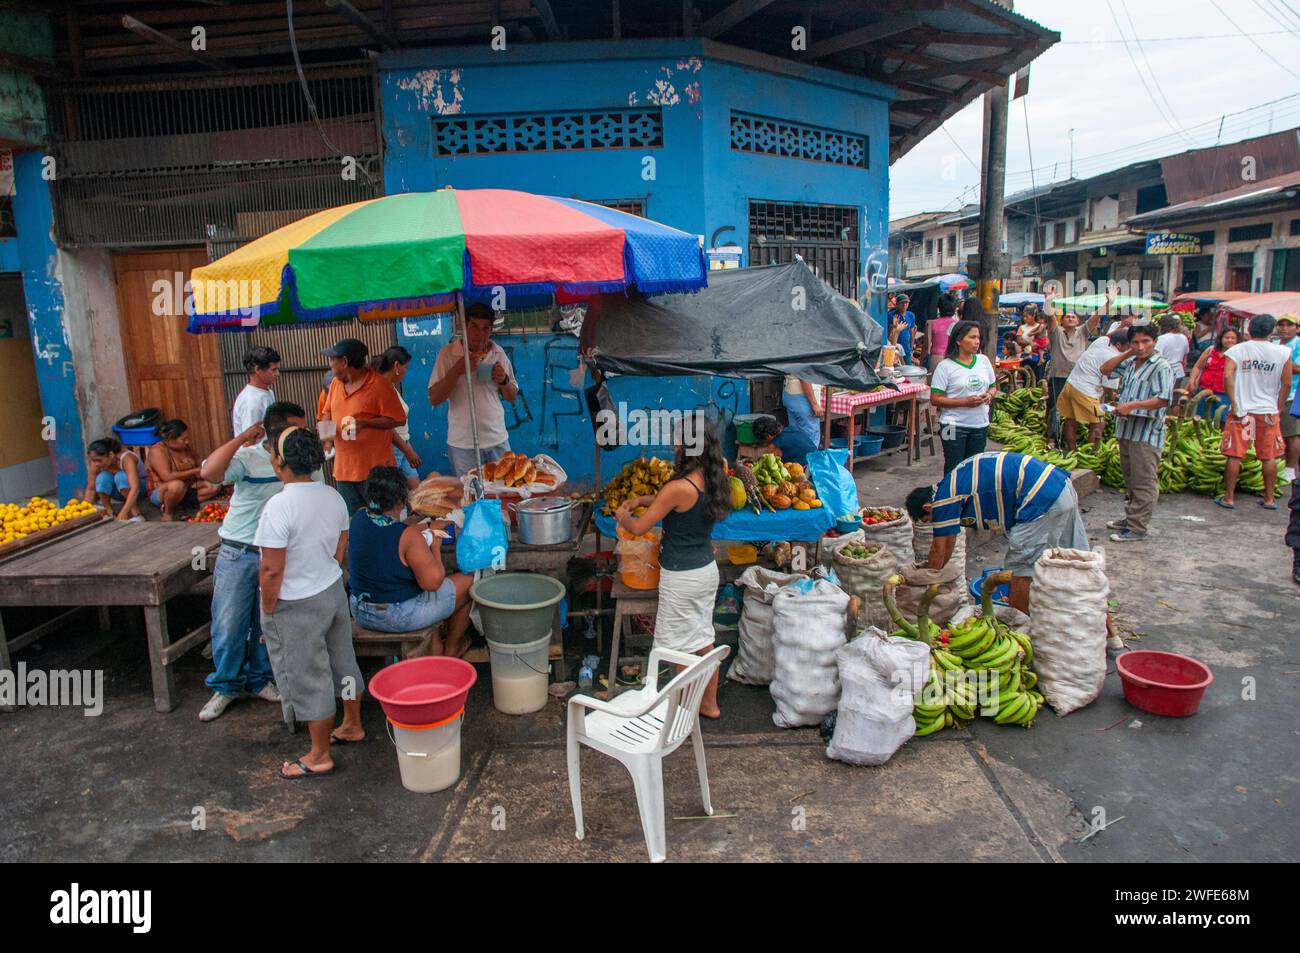 Market scenes, Iquitos, the largest city in the Peruvian rainforest, Peru, South America.  Iquitos is the capital city of Peru's Maynas Province and L Stock Photo